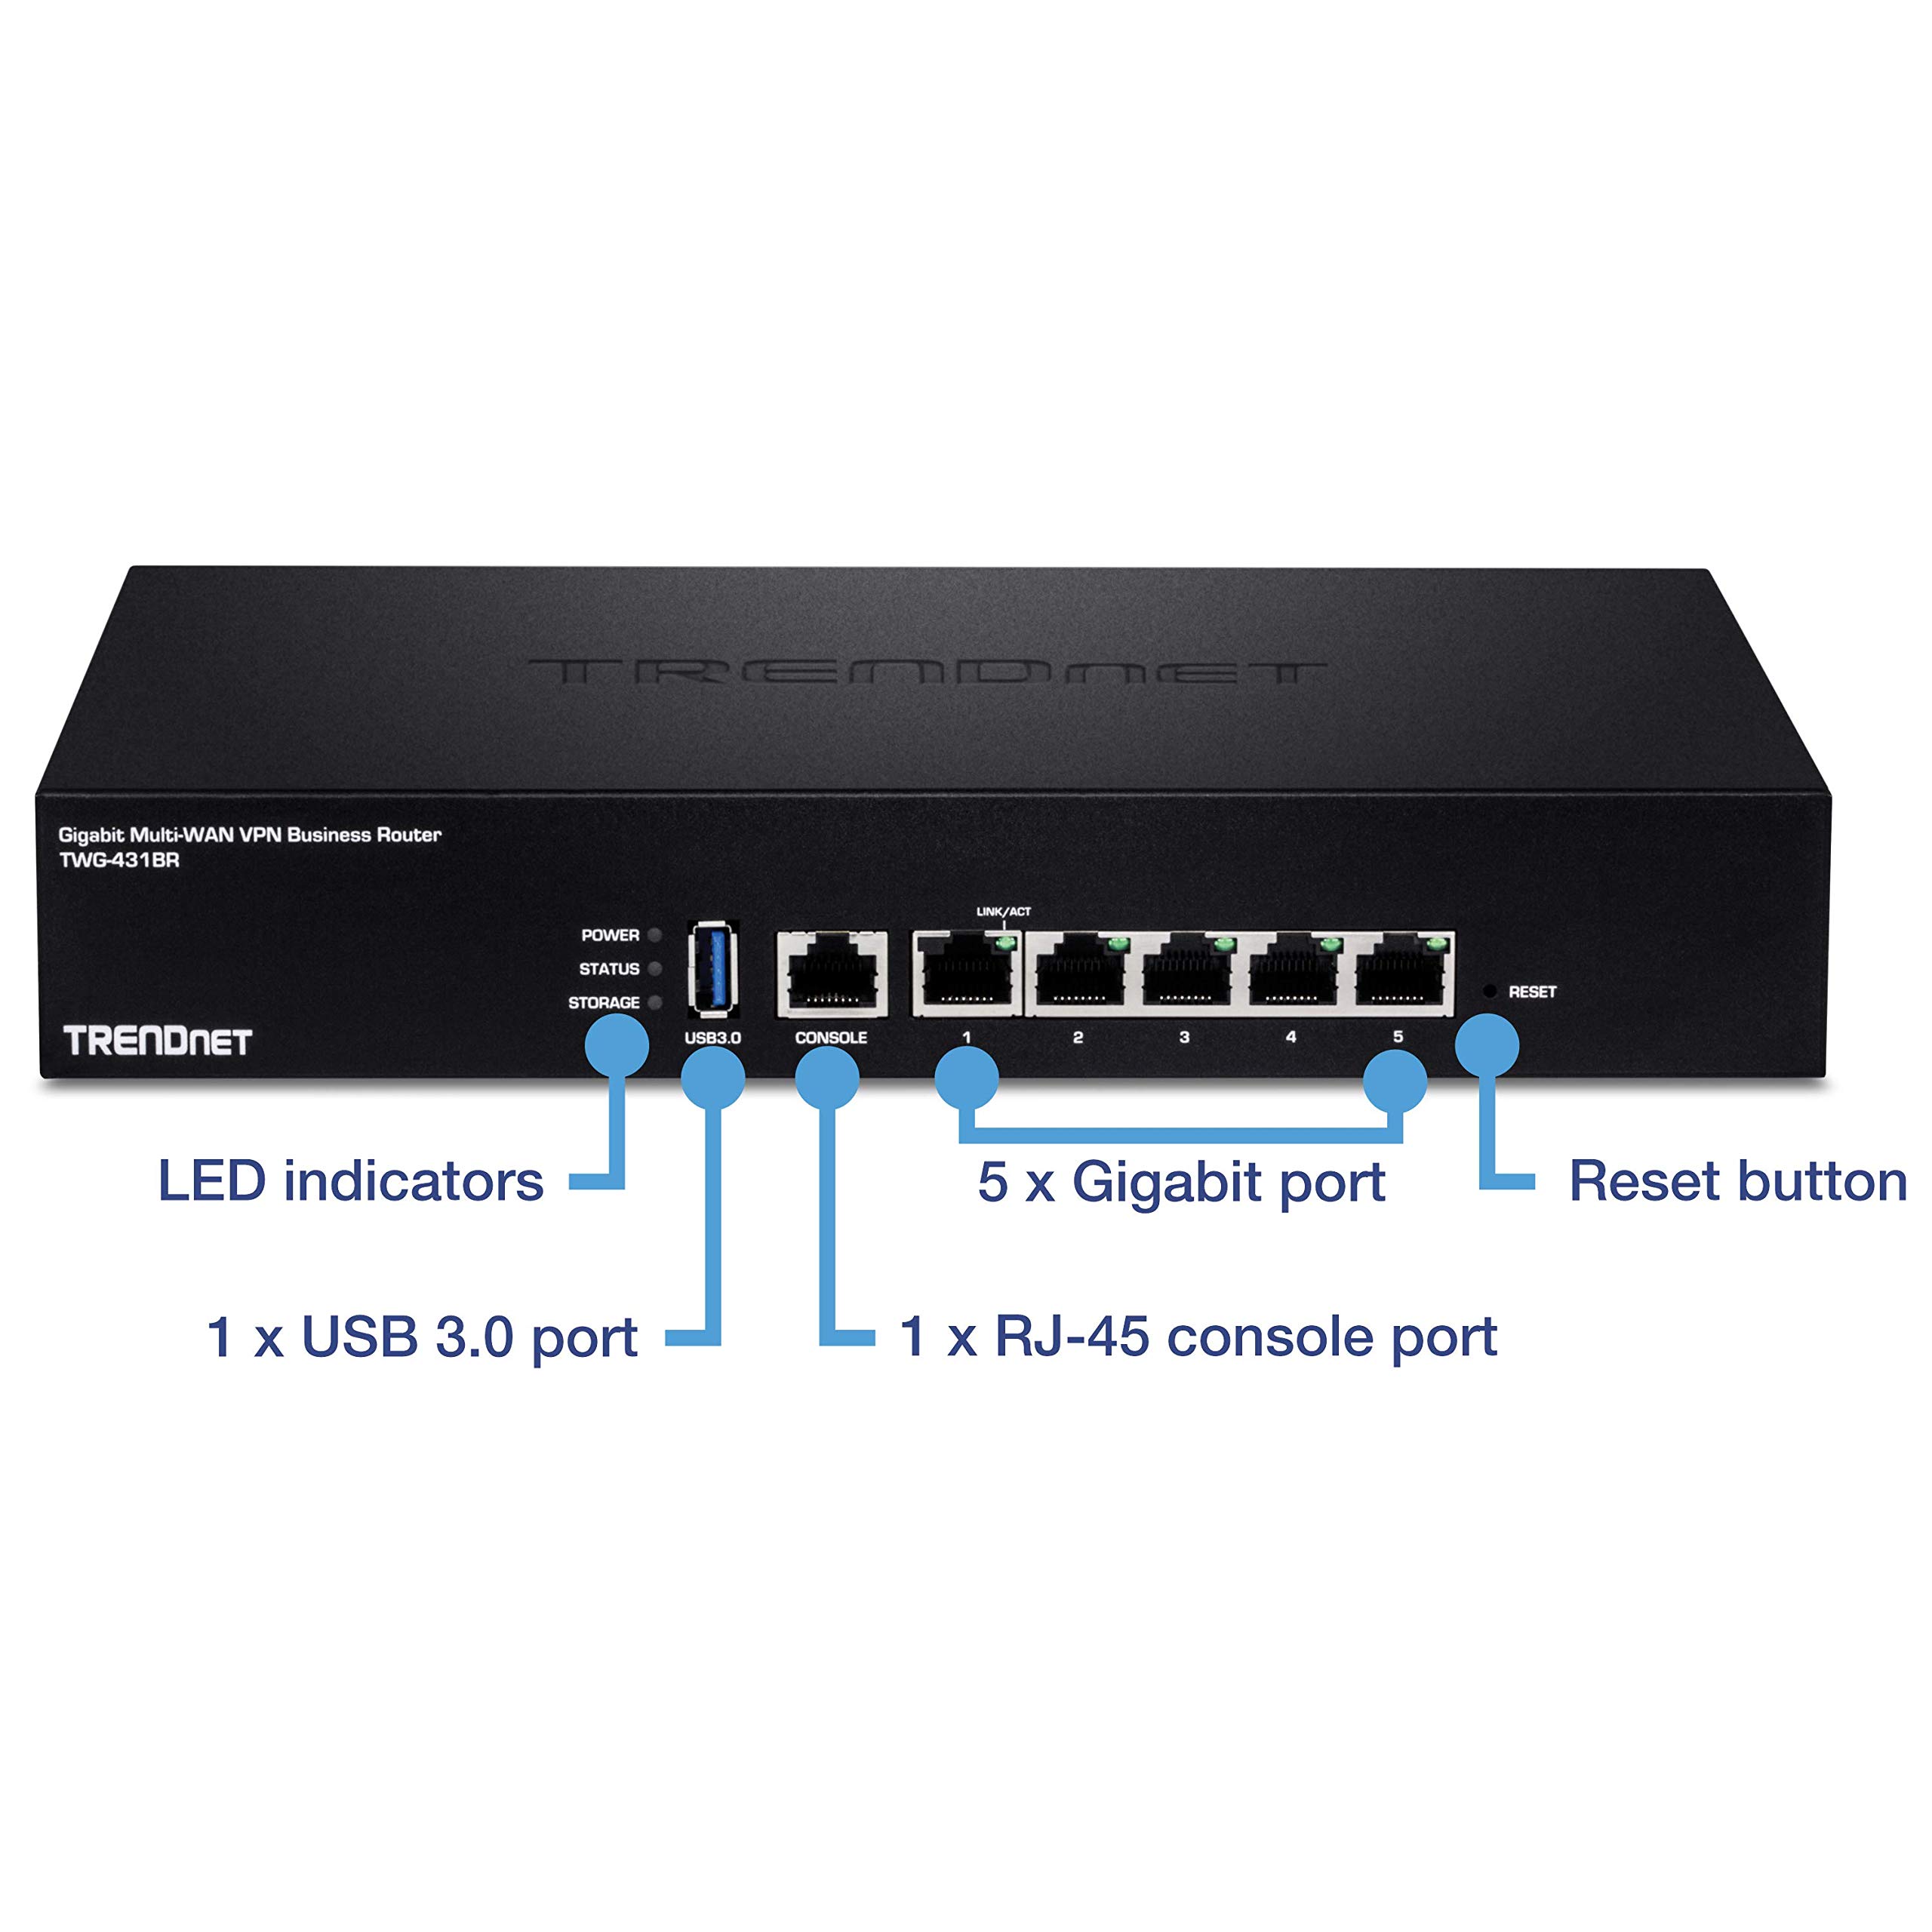 TRENDnet Gigabit Multi-WAN VPN Business Router, TWG-431BR, 5 x Gigabit Ports, 1 x Console Port, QoS, Inter-VLAN Routing, Dynamic Routing, Load-Balancing, High Availability, Online Firmware Updates